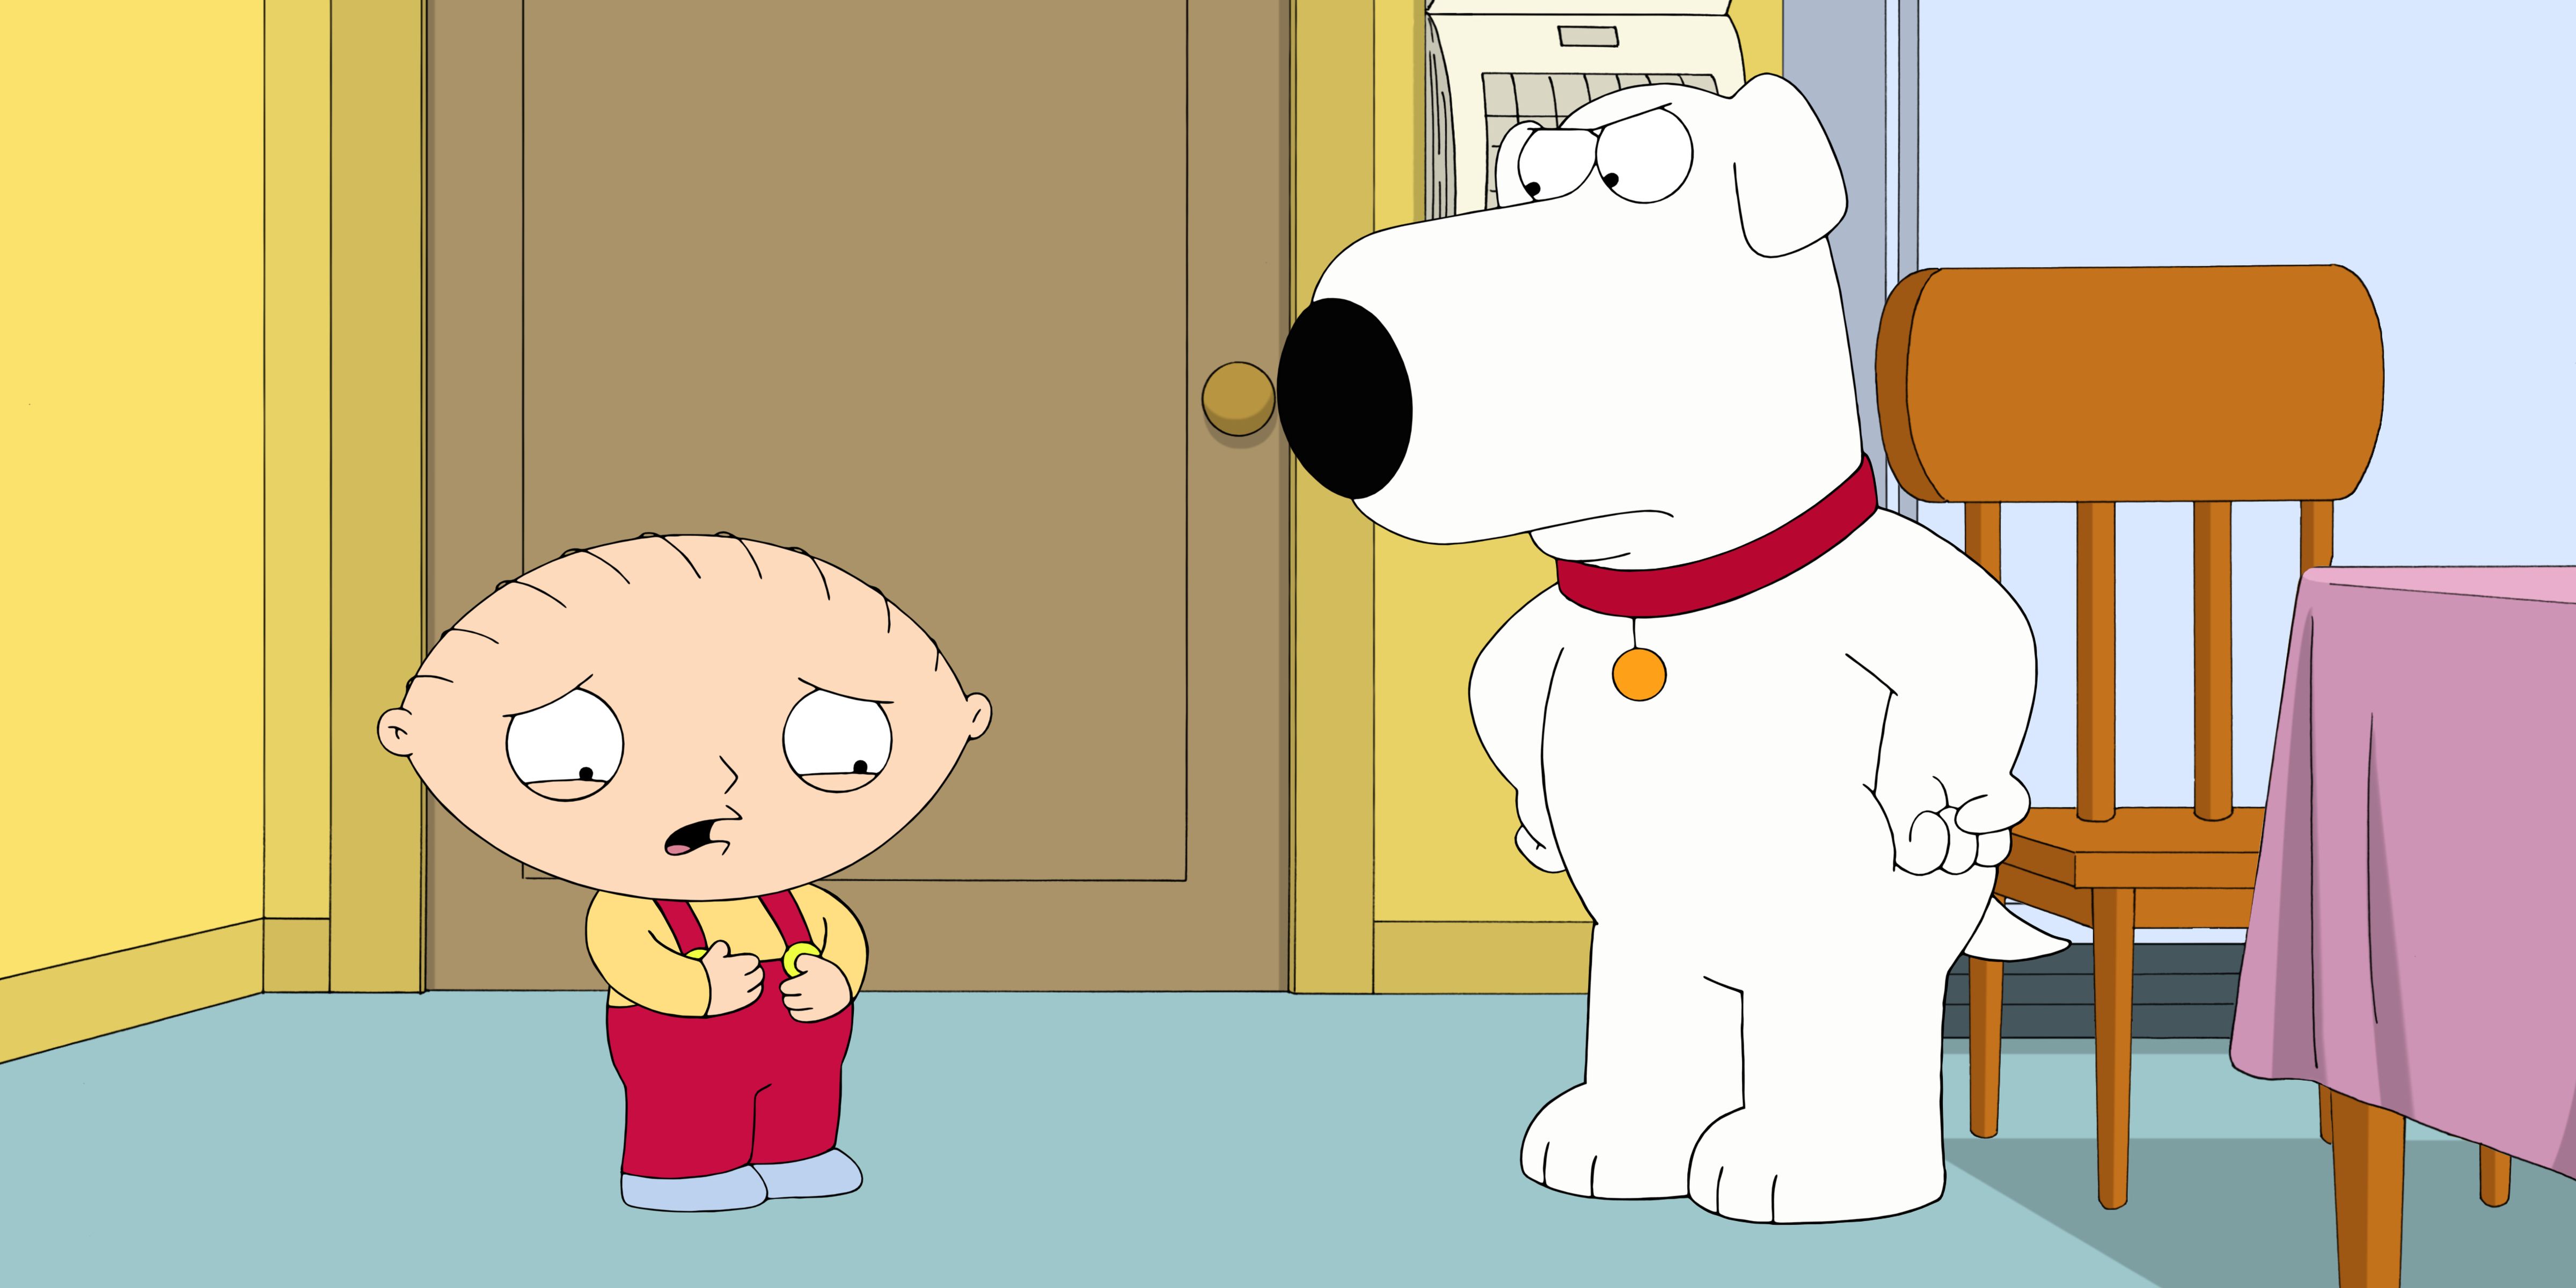 Stewie and Brian argue about a debt in Family Guy